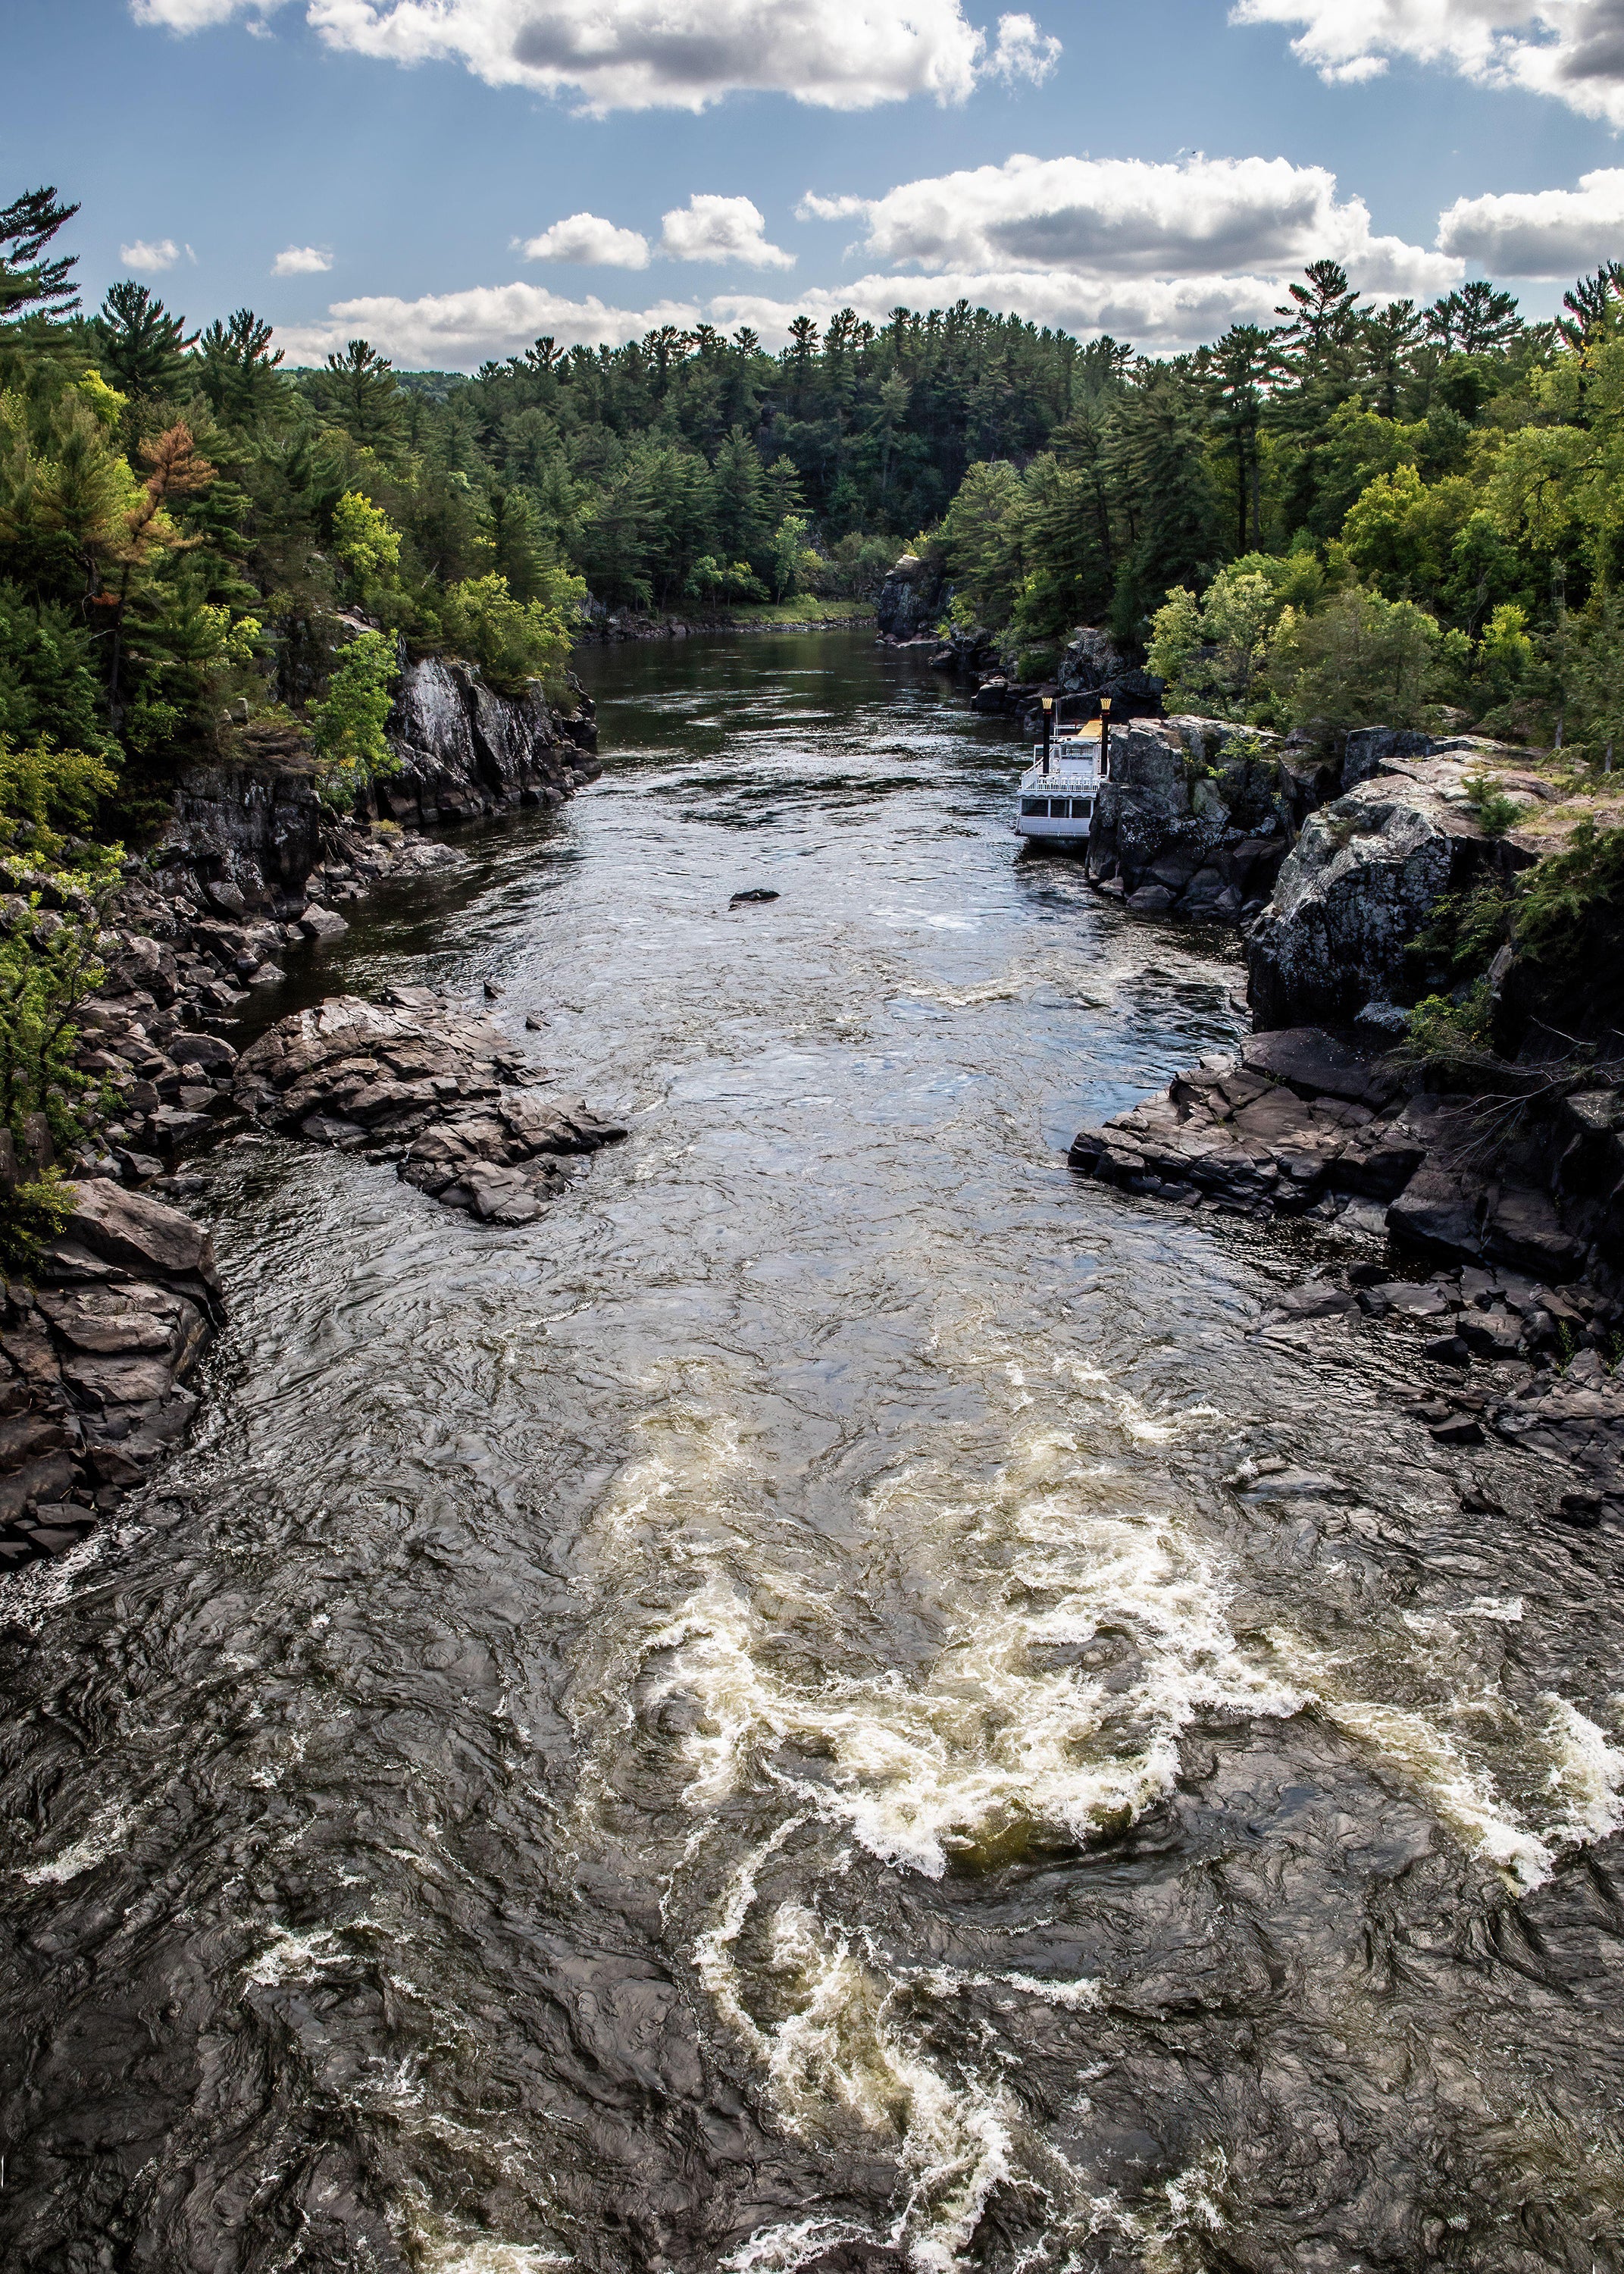 Rapids on the St. Croix River in Minnesota.